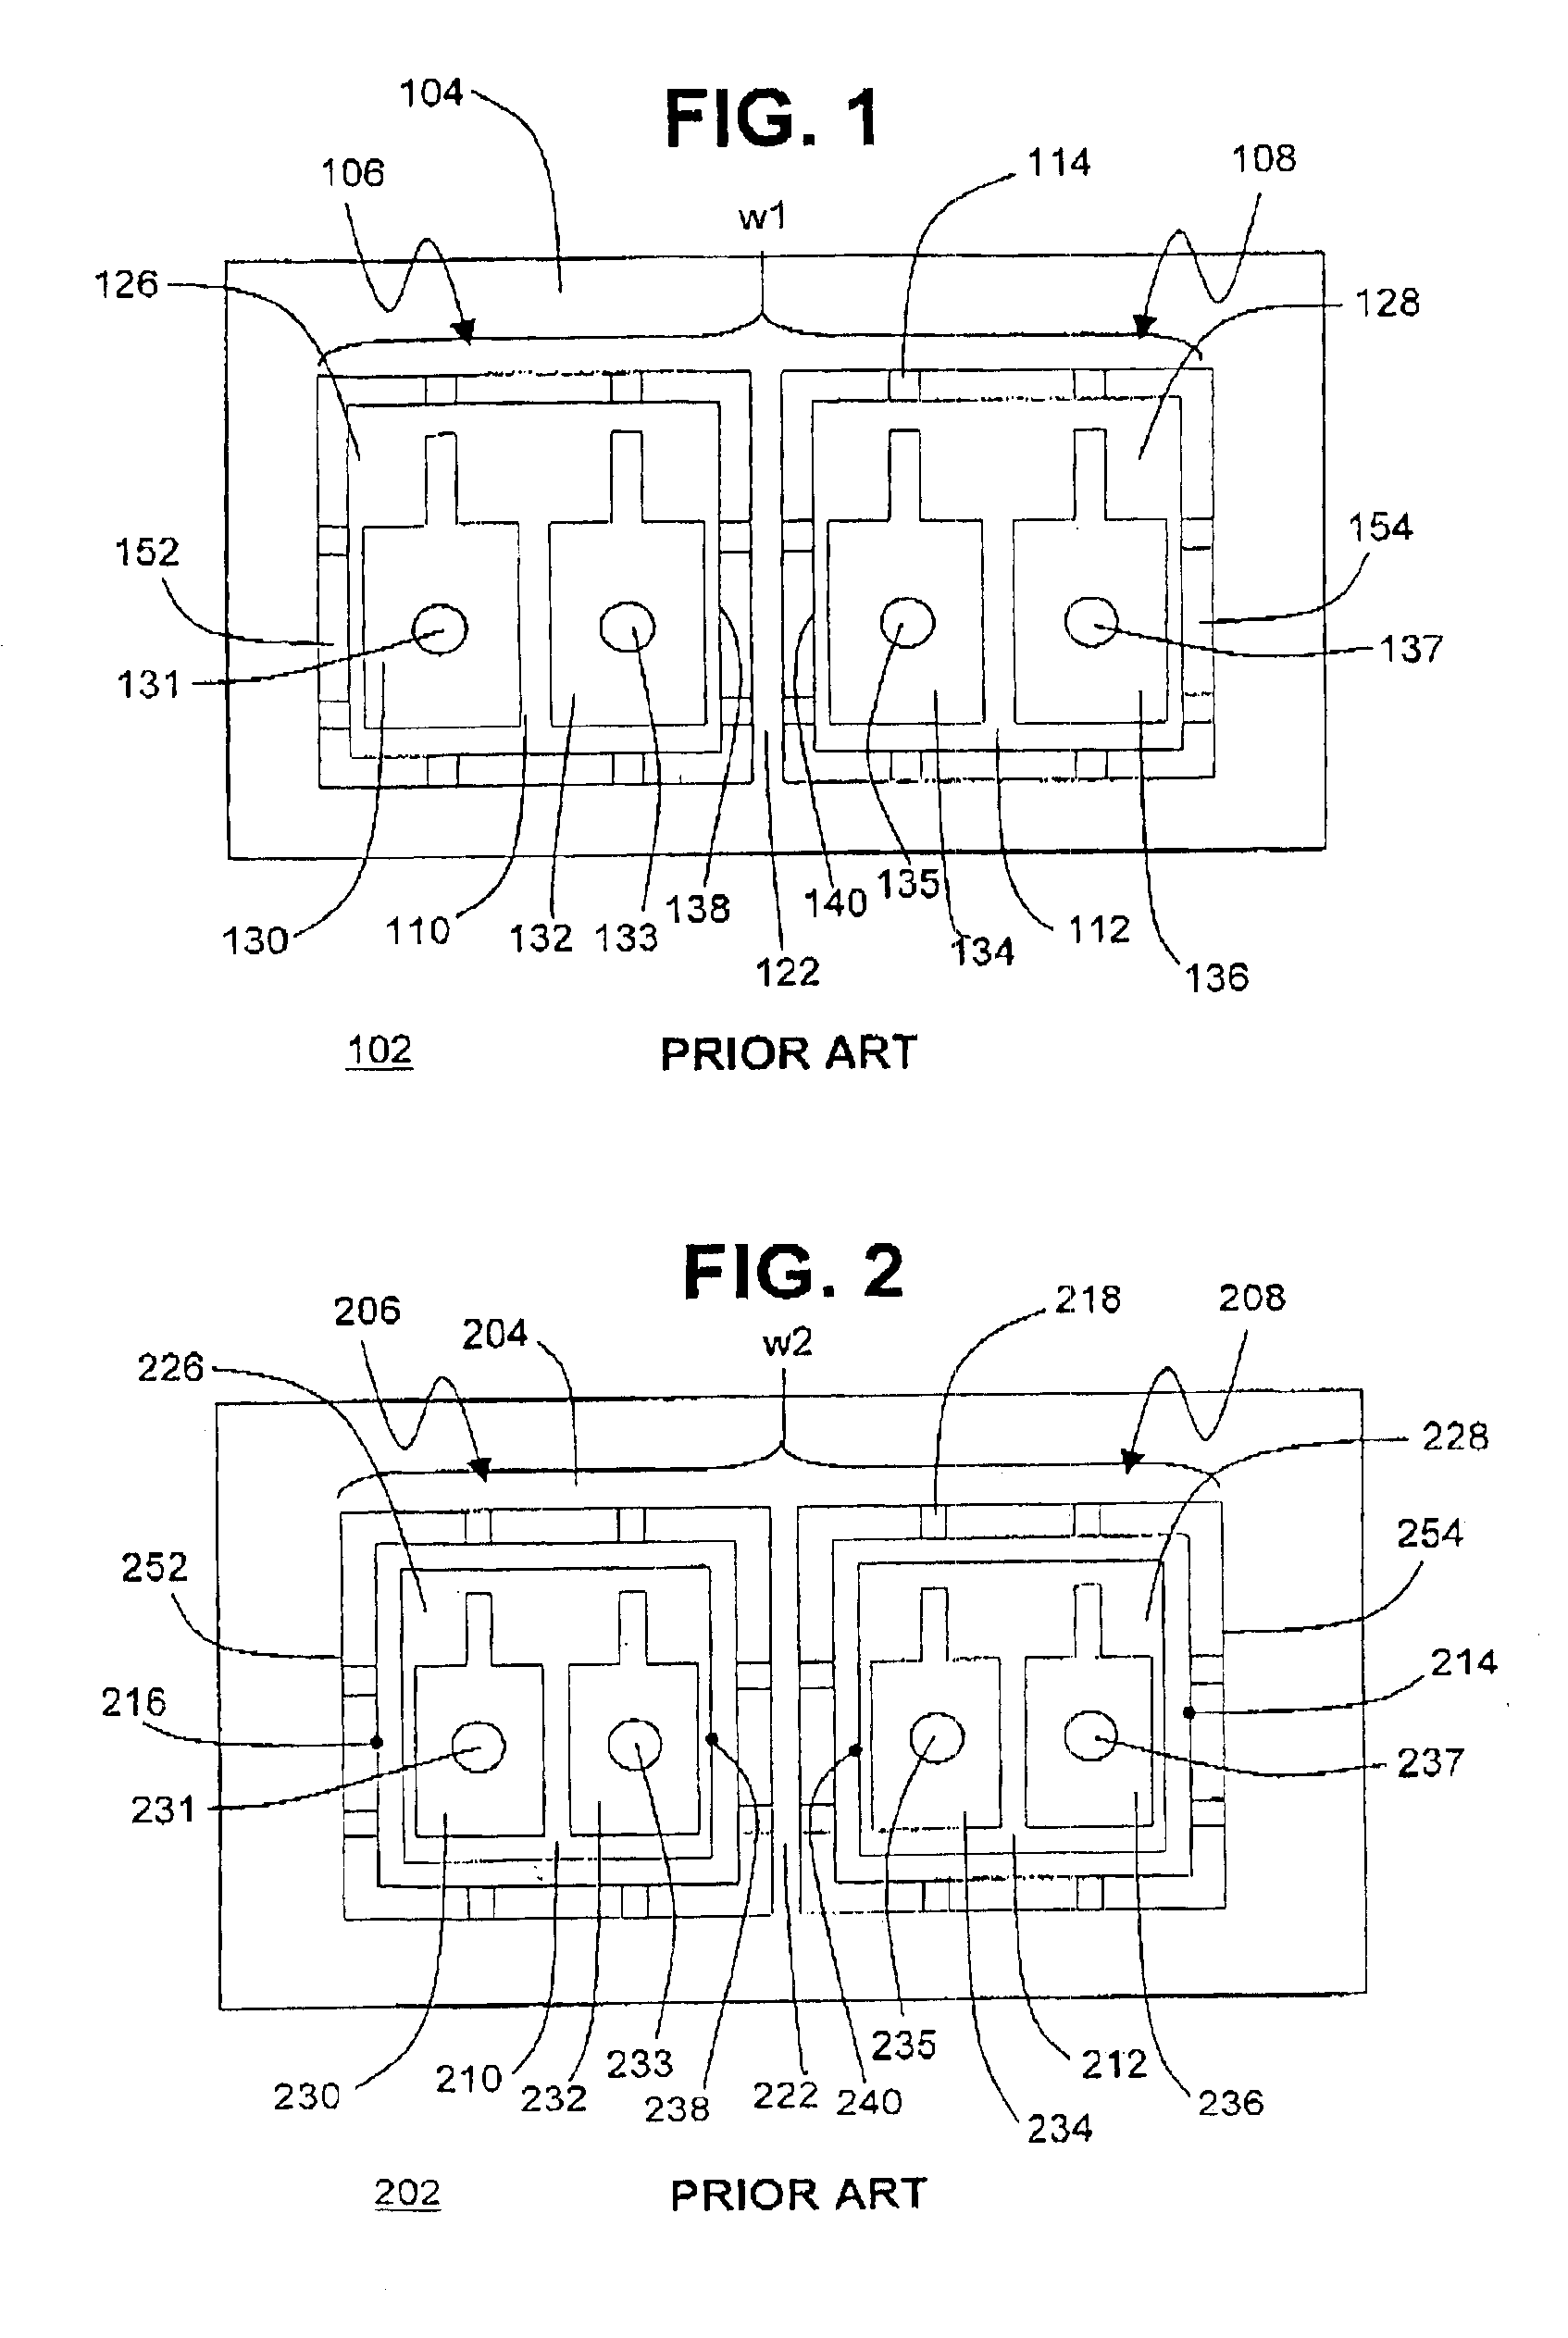 Optical receptacle, transceiver and cage